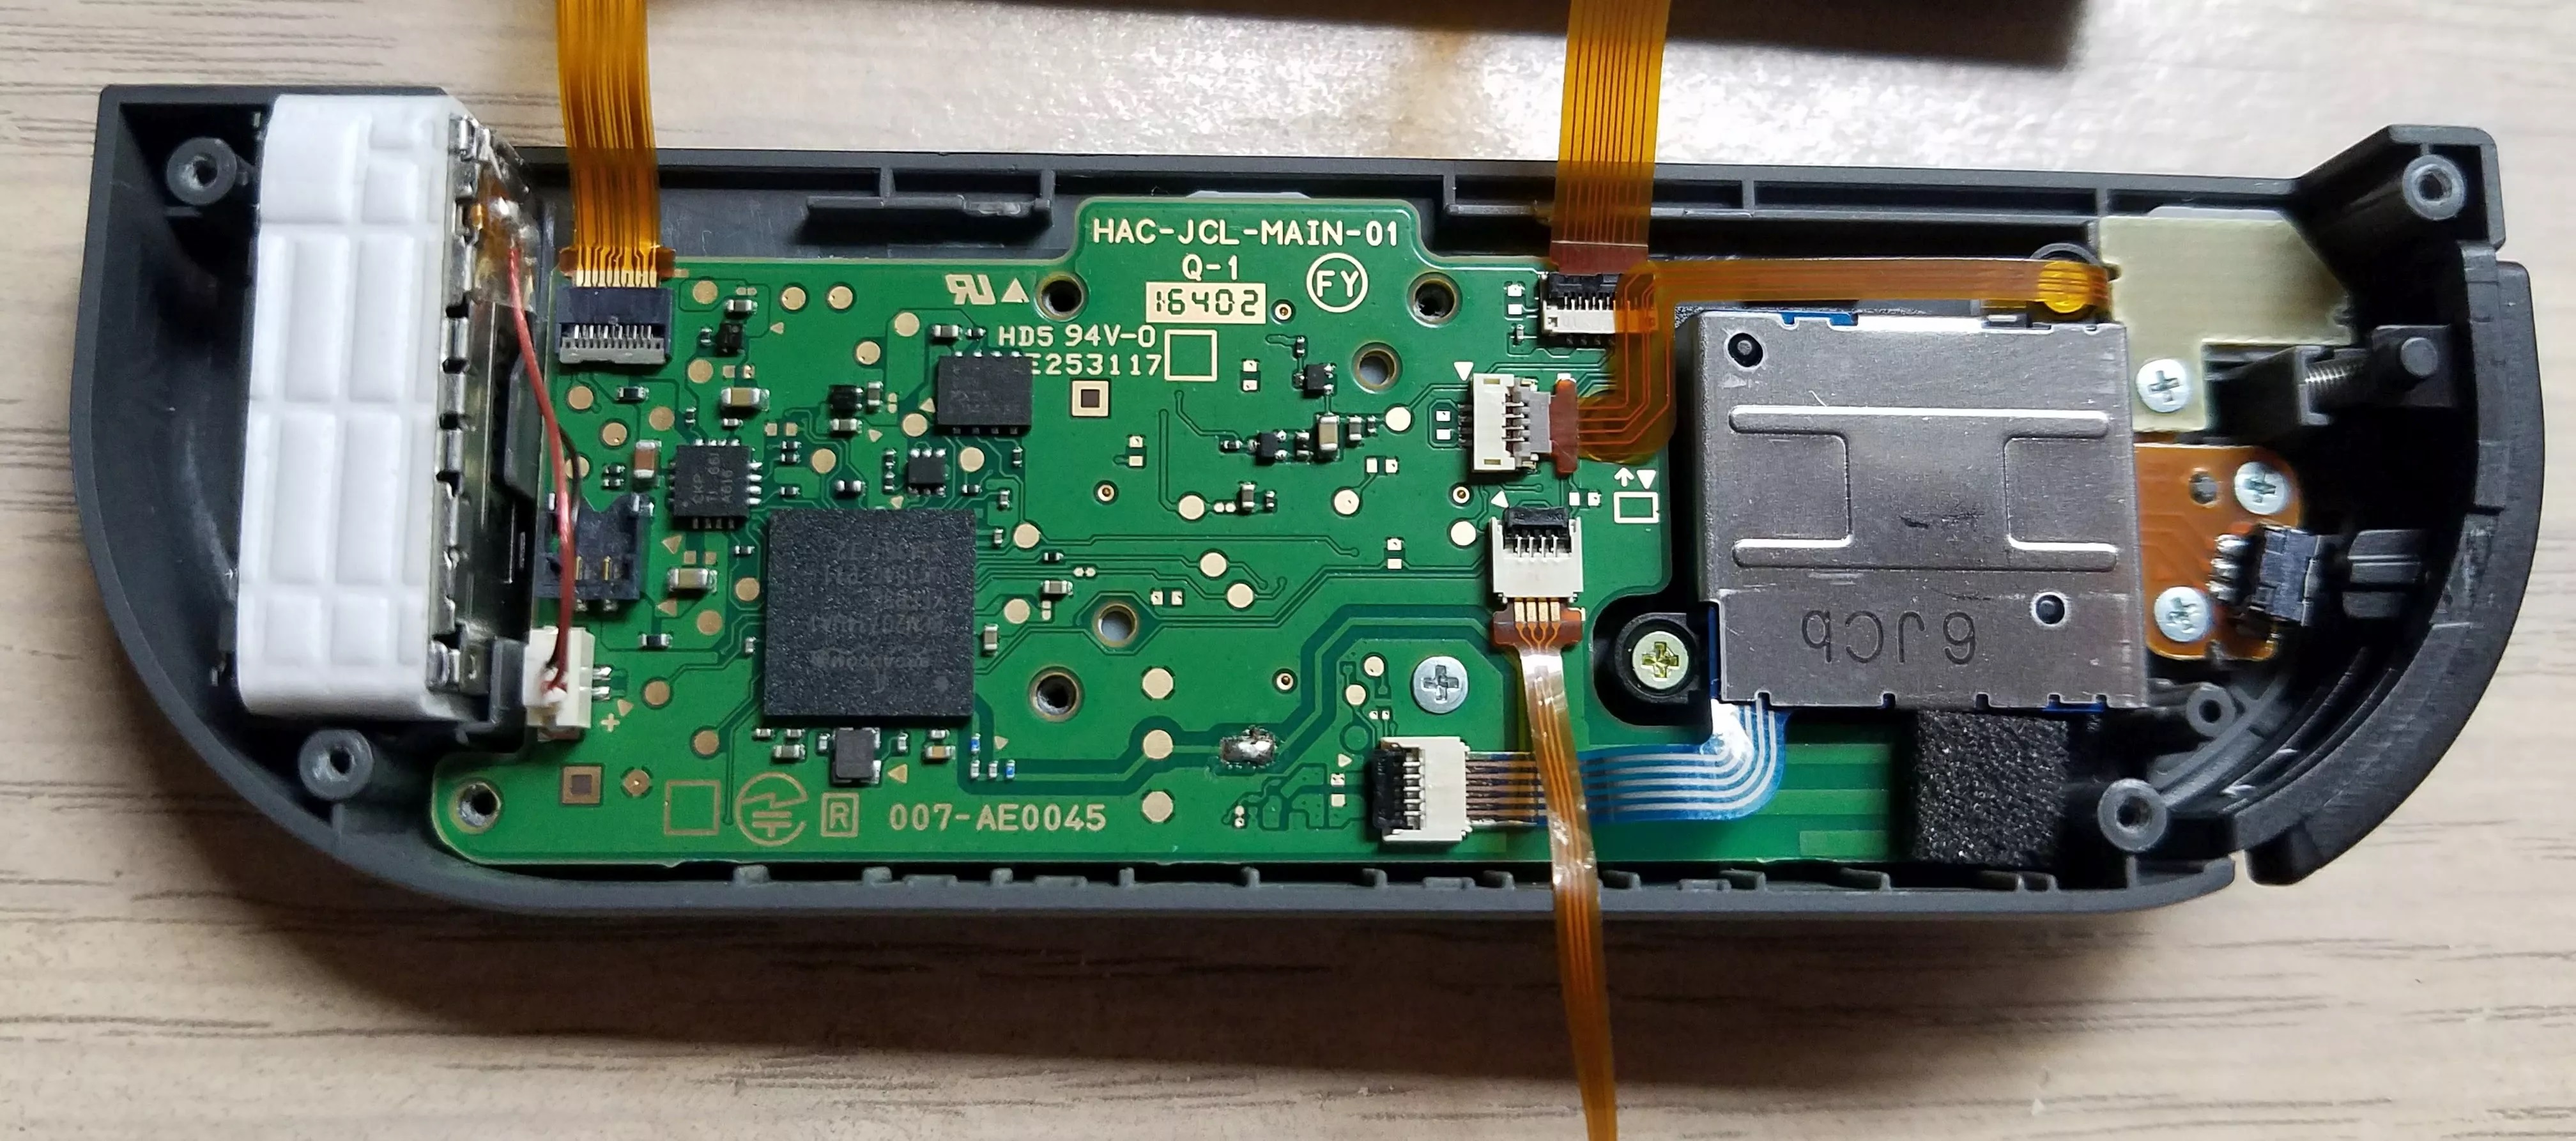 mest uddannelse Ideelt Nintendo offering “simple fix” for disconnecting Switch controllers  [Updated] | Ars Technica